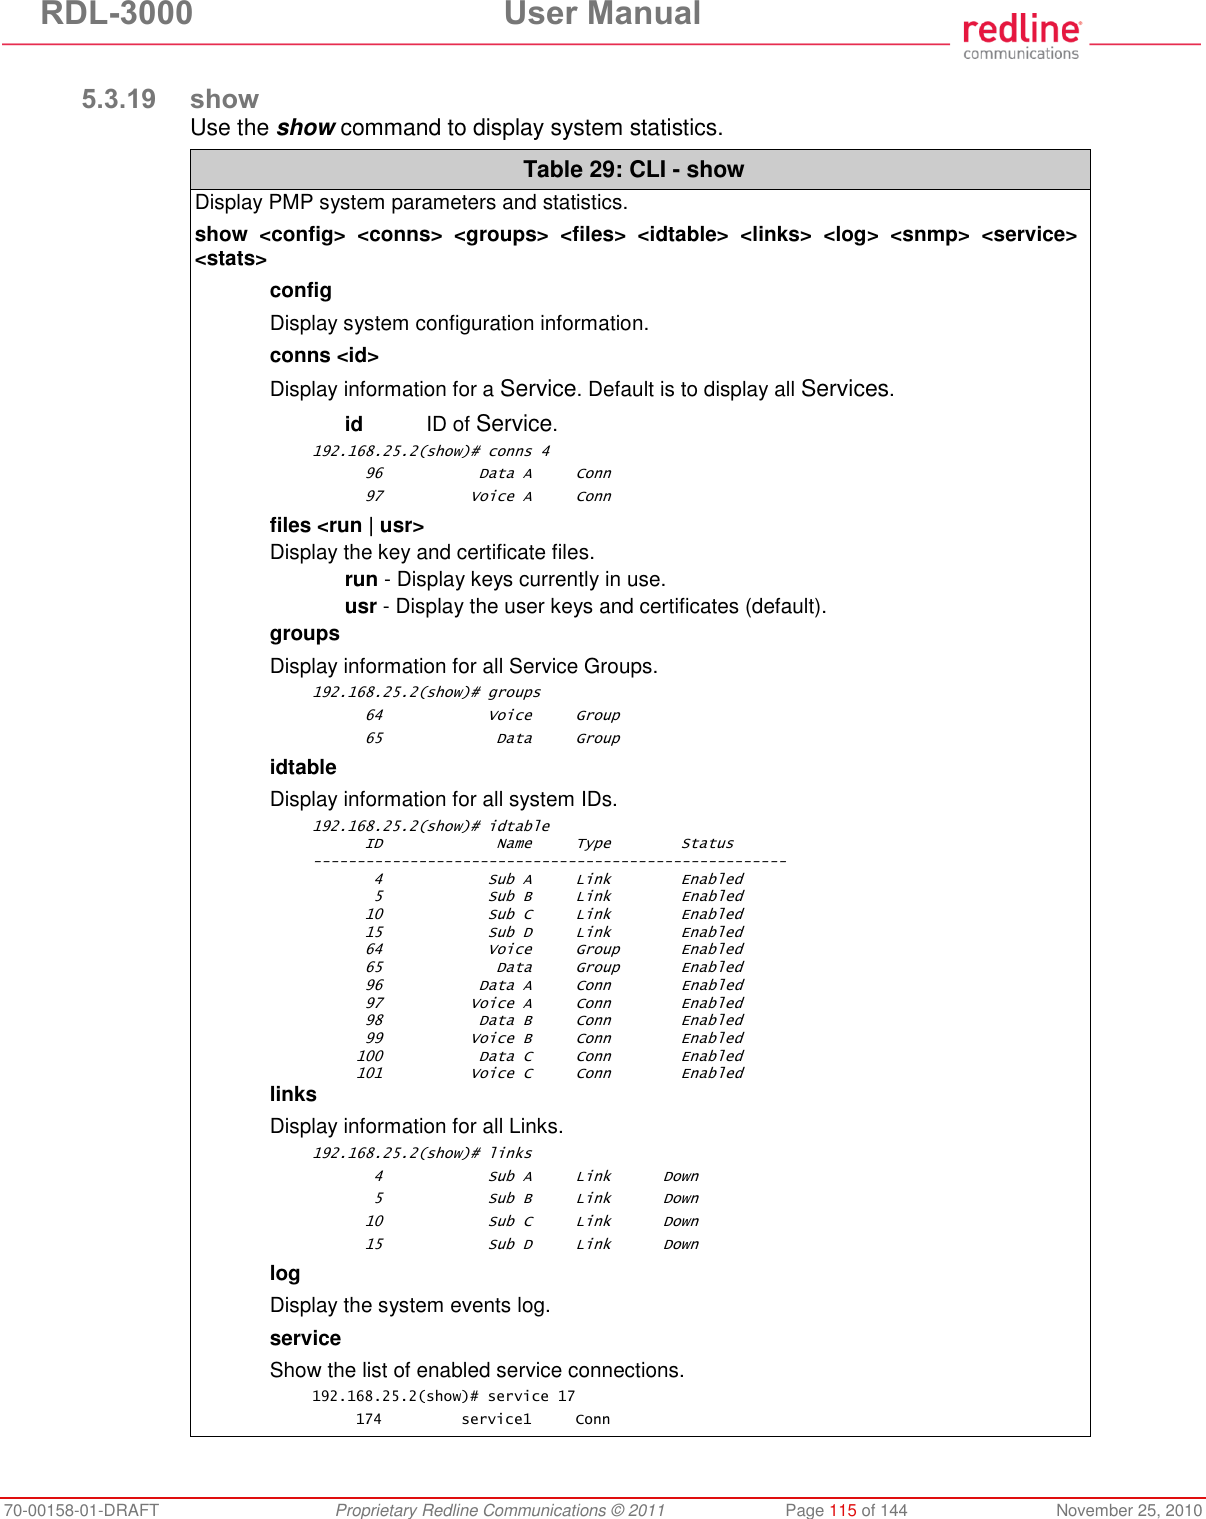 RDL-3000  User Manual 70-00158-01-DRAFT  Proprietary Redline Communications © 2011  Page 115 of 144  November 25, 2010  5.3.19 show Use the show command to display system statistics. Table 29: CLI - show Display PMP system parameters and statistics. show  &lt;config&gt;  &lt;conns&gt;  &lt;groups&gt;  &lt;files&gt;  &lt;idtable&gt;  &lt;links&gt;  &lt;log&gt;  &lt;snmp&gt;  &lt;service&gt; &lt;stats&gt; config Display system configuration information. conns &lt;id&gt; Display information for a Service. Default is to display all Services.  id  ID of Service. 192.168.25.2(show)# conns 4       96           Data A     Conn       97          Voice A     Conn files &lt;run | usr&gt; Display the key and certificate files.  run - Display keys currently in use.  usr - Display the user keys and certificates (default). groups Display information for all Service Groups. 192.168.25.2(show)# groups       64            Voice     Group       65             Data     Group idtable Display information for all system IDs. 192.168.25.2(show)# idtable       ID             Name     Type        Status ------------------------------------------------------        4            Sub A     Link        Enabled        5            Sub B     Link        Enabled       10            Sub C     Link        Enabled       15            Sub D     Link        Enabled       64            Voice     Group       Enabled       65             Data     Group       Enabled       96           Data A     Conn        Enabled       97          Voice A     Conn        Enabled       98           Data B     Conn        Enabled       99          Voice B     Conn        Enabled      100           Data C     Conn        Enabled      101          Voice C     Conn        Enabled links Display information for all Links. 192.168.25.2(show)# links        4            Sub A     Link      Down        5            Sub B     Link      Down       10            Sub C     Link      Down       15            Sub D     Link      Down  log Display the system events log. service Show the list of enabled service connections. 192.168.25.2(show)# service 17      174         service1     Conn 